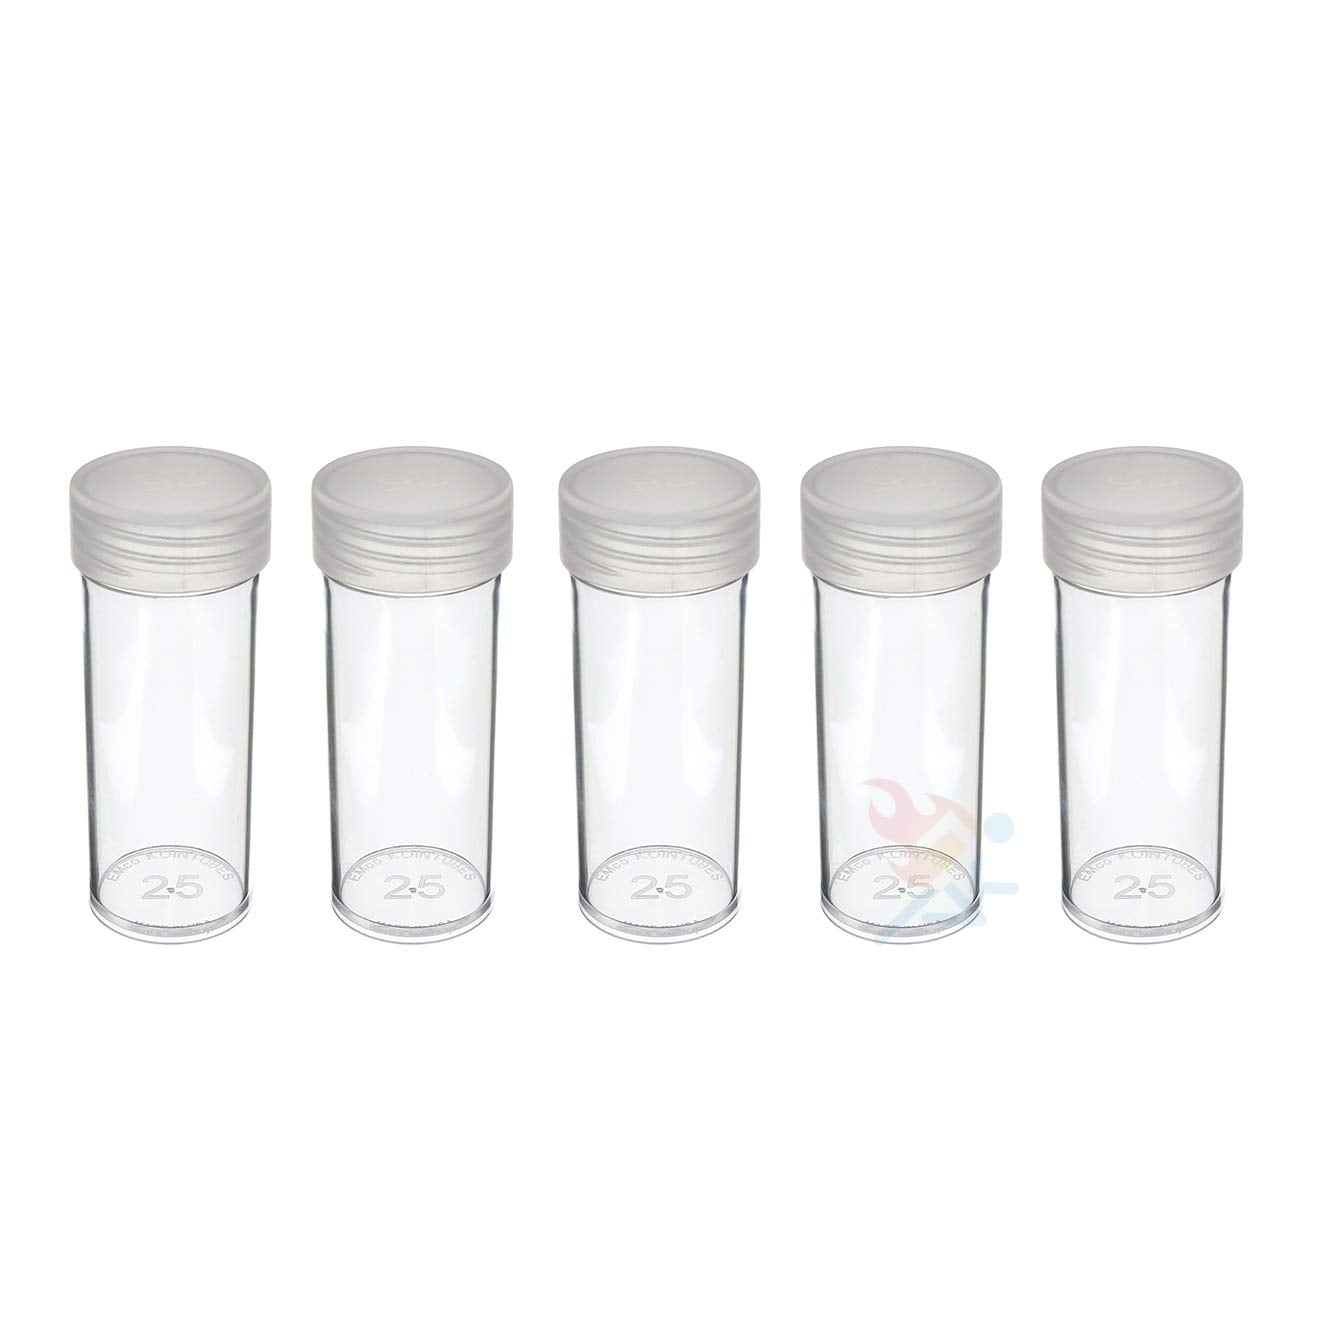 Round Clear Plastic Half Dollar Size Coin Storage Tube Holders w/Screw Lid 5 